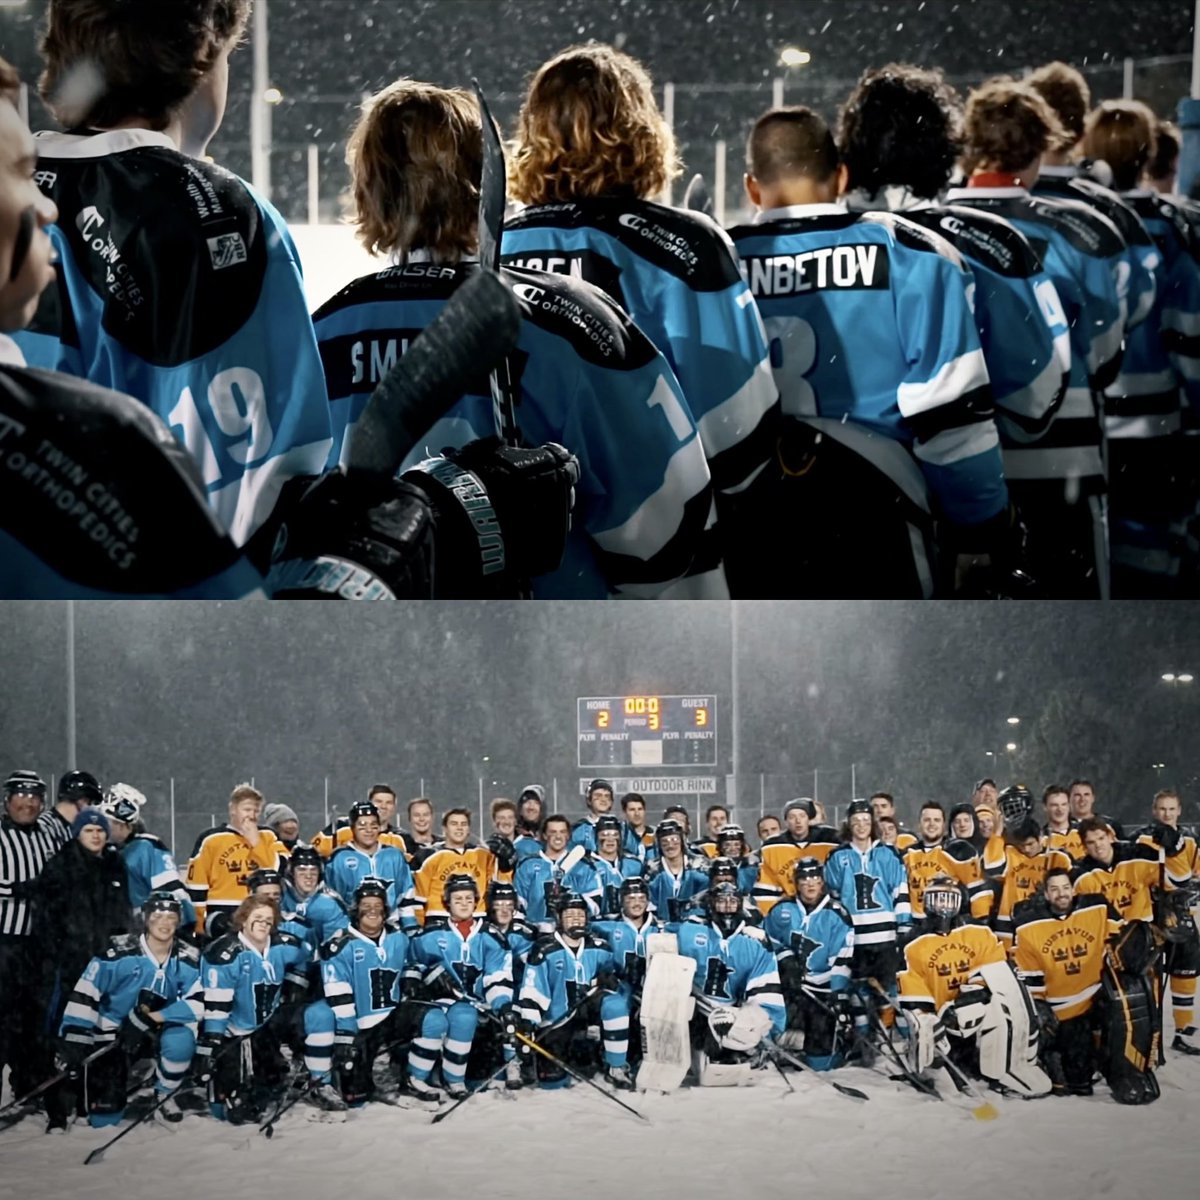 OX OUTDOOR GAME TONIGHT!

Cheer the boys on tonight at 7pm as they take on the Univ of MN Gophers ACHA D2 Team! 

The weather is going to be perfect for some Pondy!

Hot soups, drinks and cold beer provided by UDE Catering!

$5 TICKET HERE!
https://t.co/BjpJECRSnw

#thintheherd https://t.co/sPzPuaFlcT